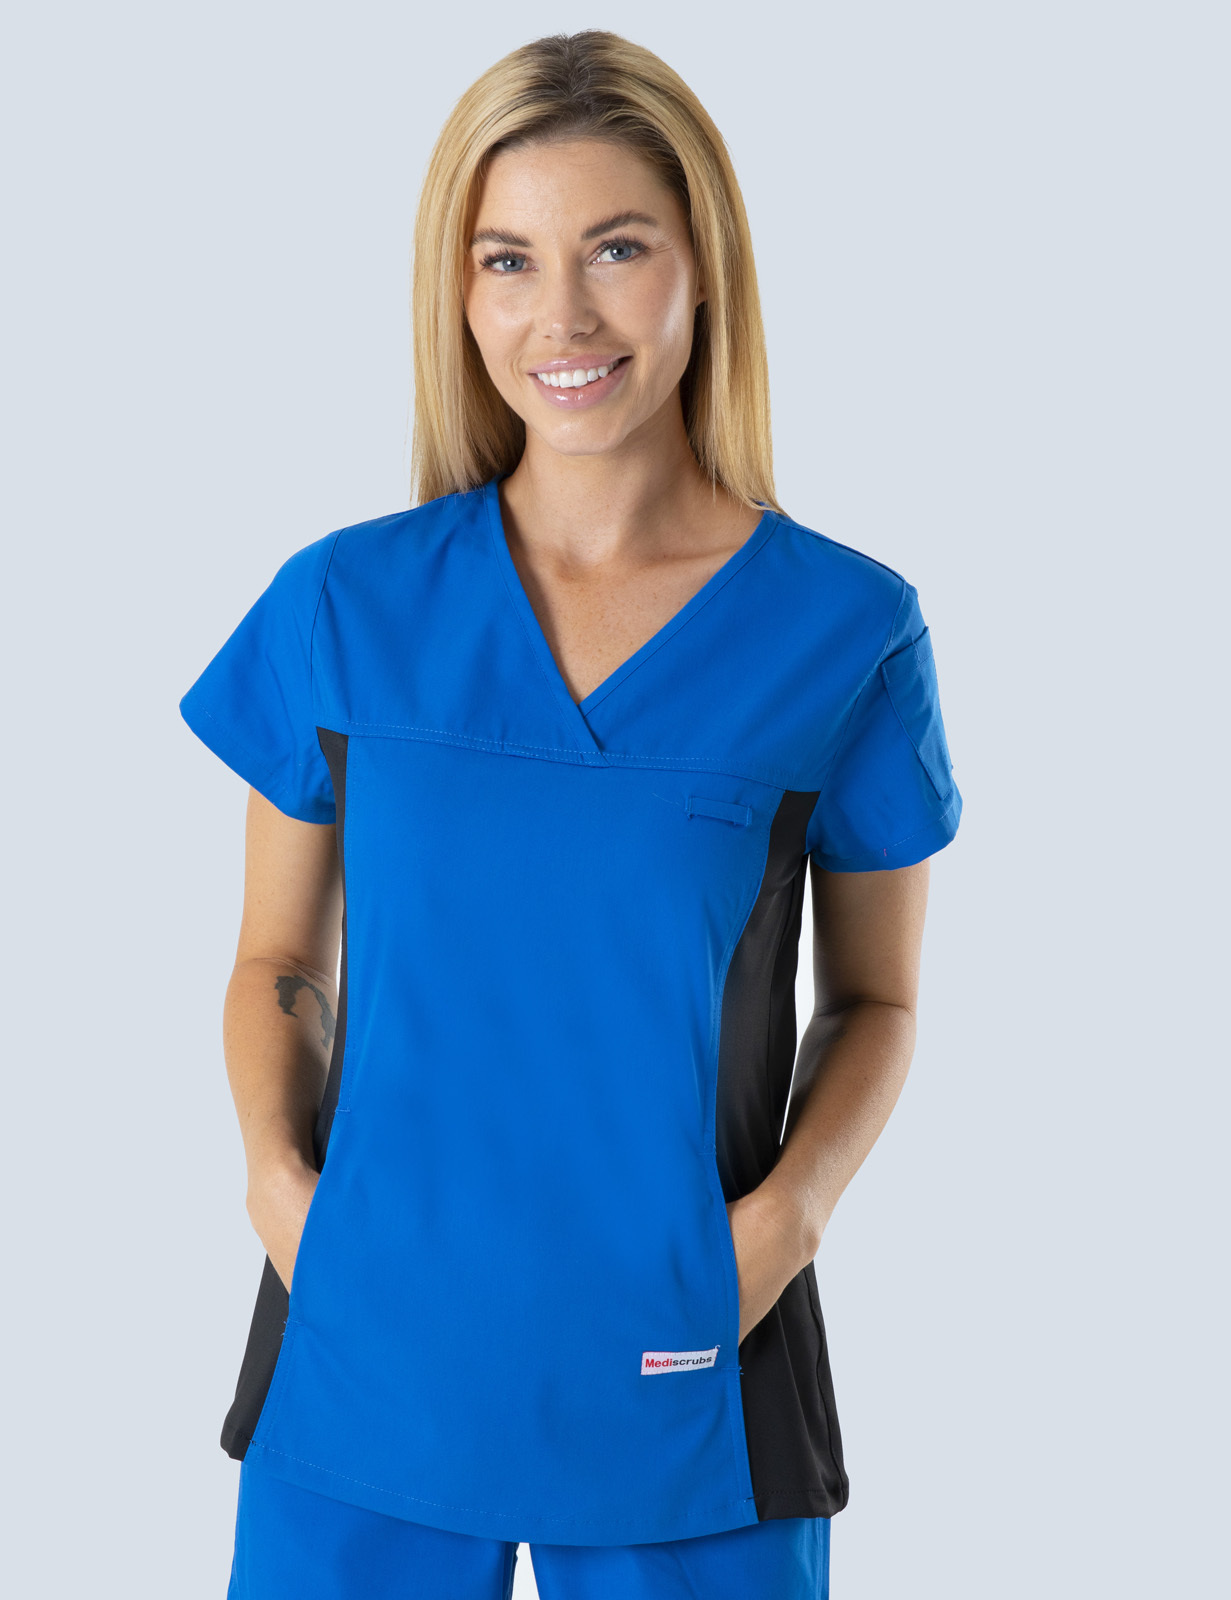 Women's Fit Solid Scrub Top With Spandex Panel - Royal - 3X Large